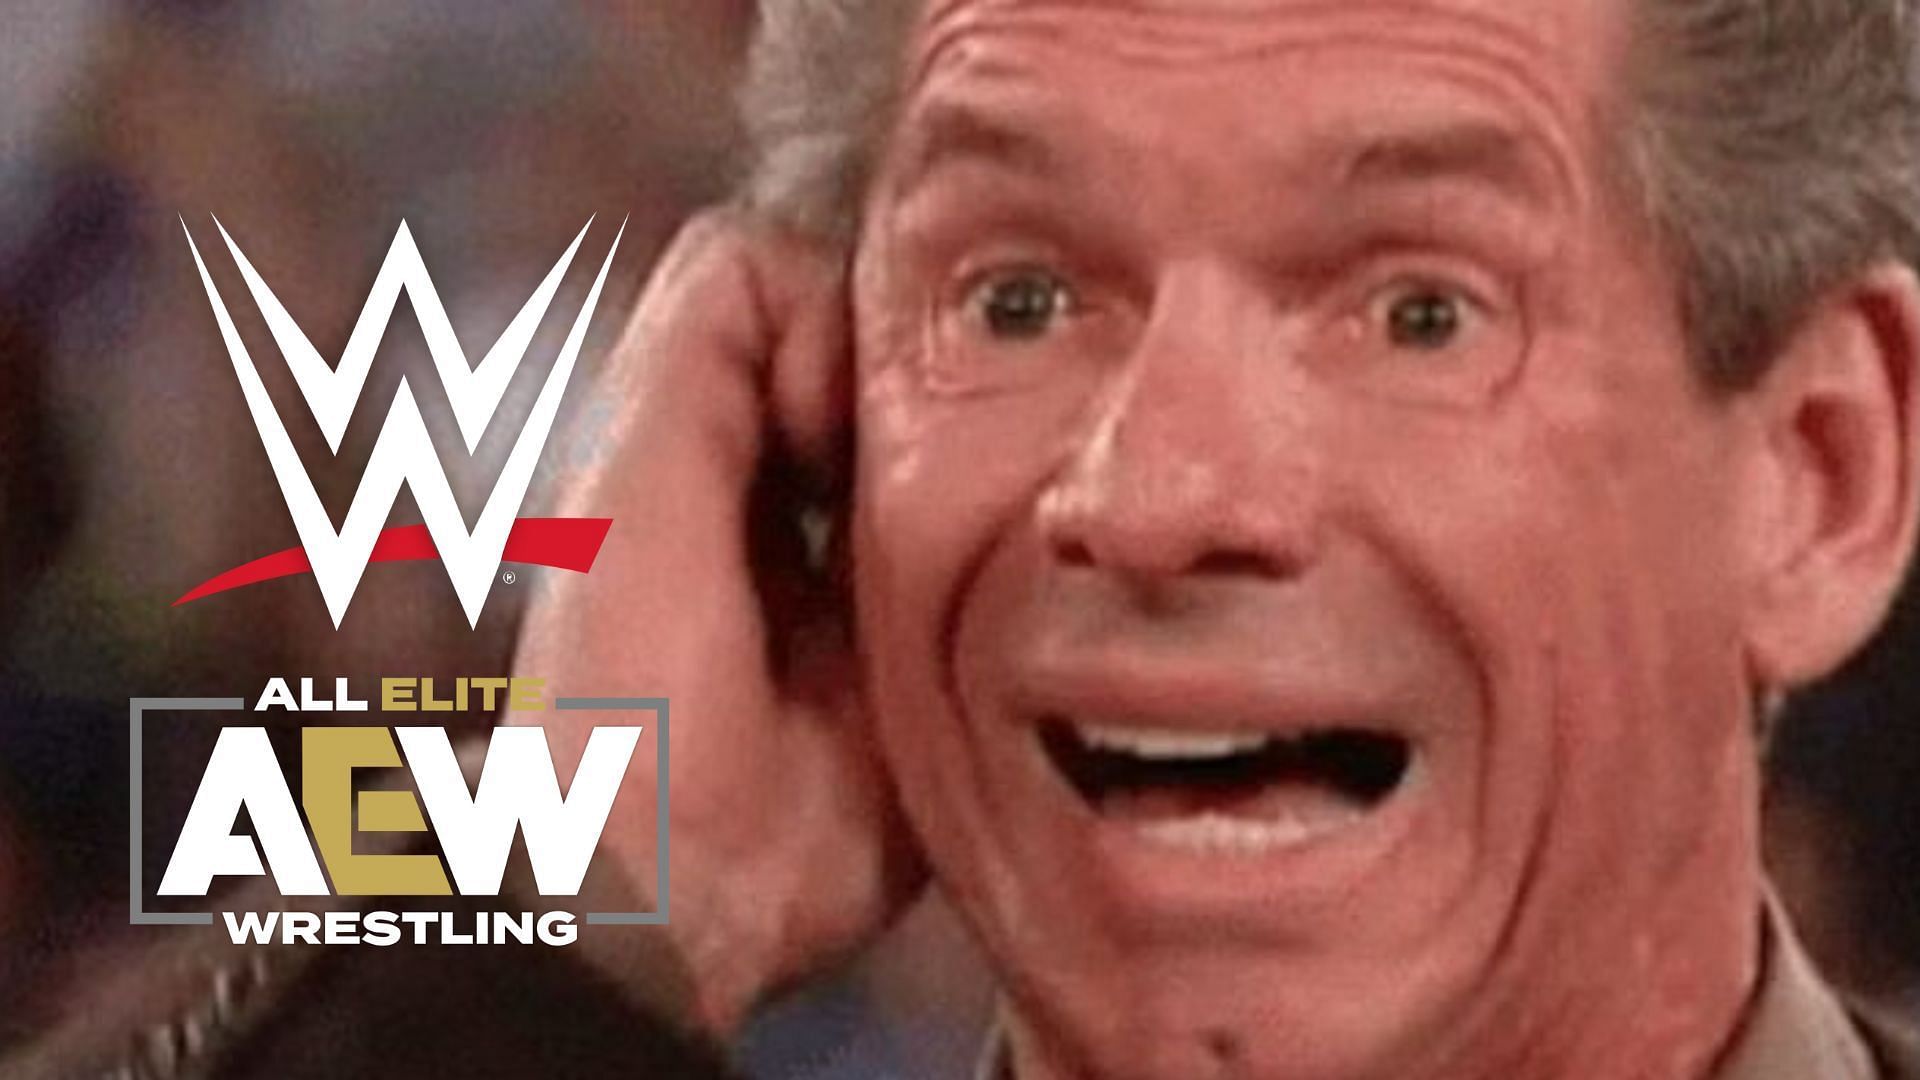 Vince McMahon has had some outlandish ideas throughout his career